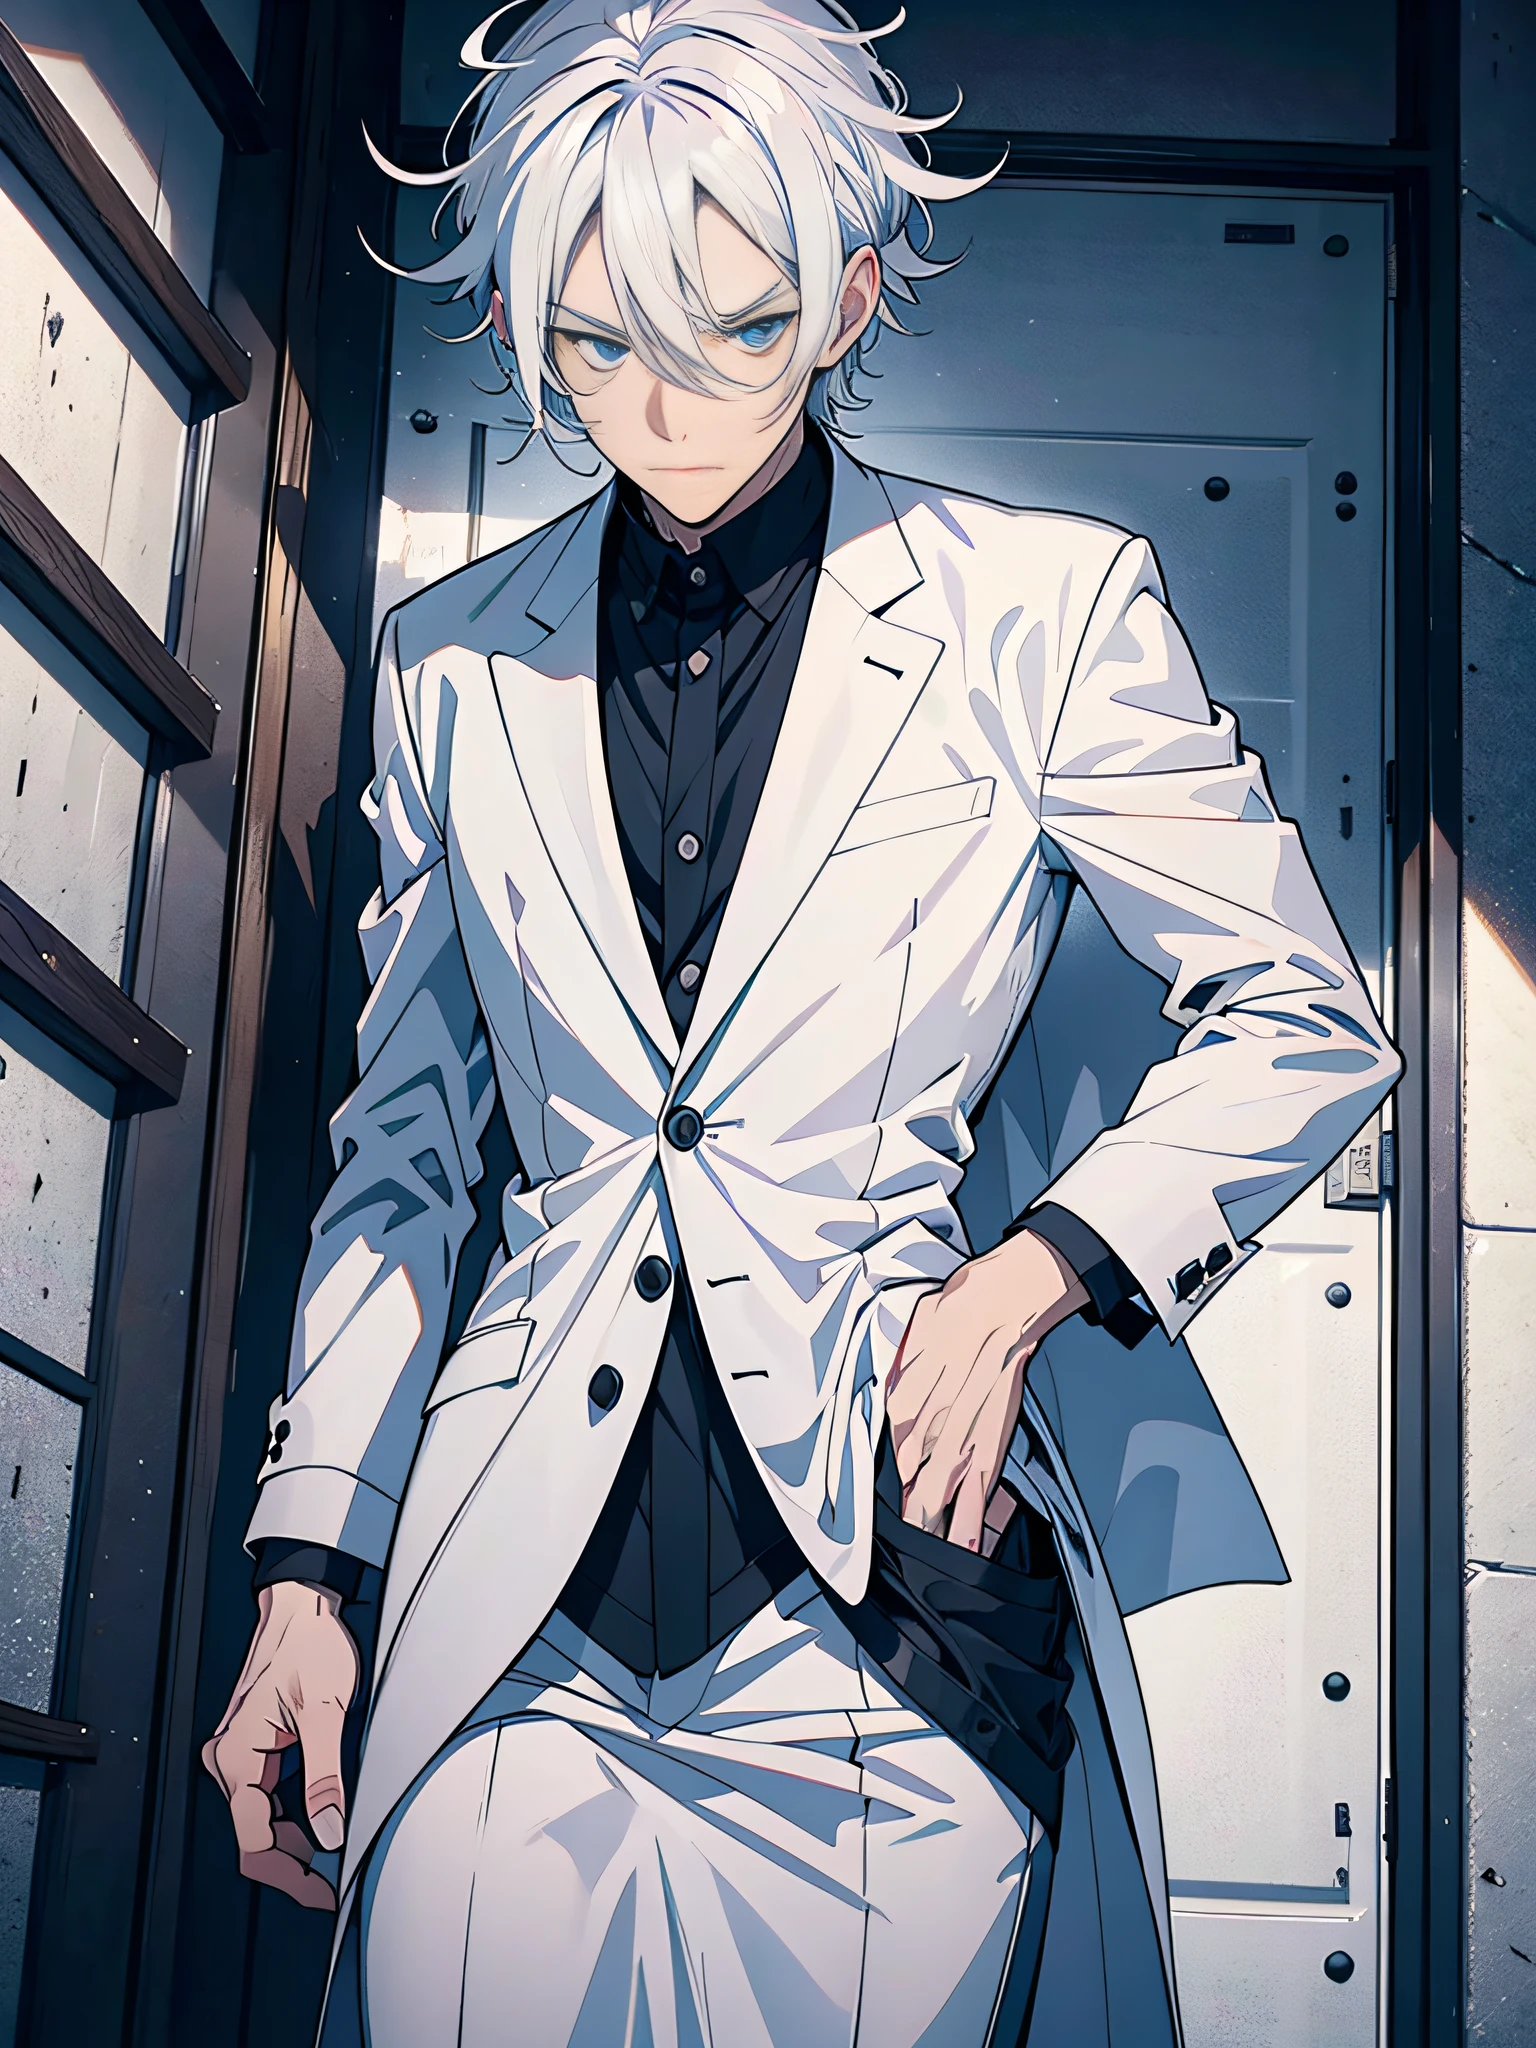 Stylistic image of a man with white hair and a knife，White hair，White hair，he has dark grey hairs，White-haired god，Tall anime guy with blue eyes，Best anime 4k，silber hair，Silver-haired madnesale anime style，whaite hair，whaite hair，messy wavy white hair，White-haired fox，Scalpel in hand